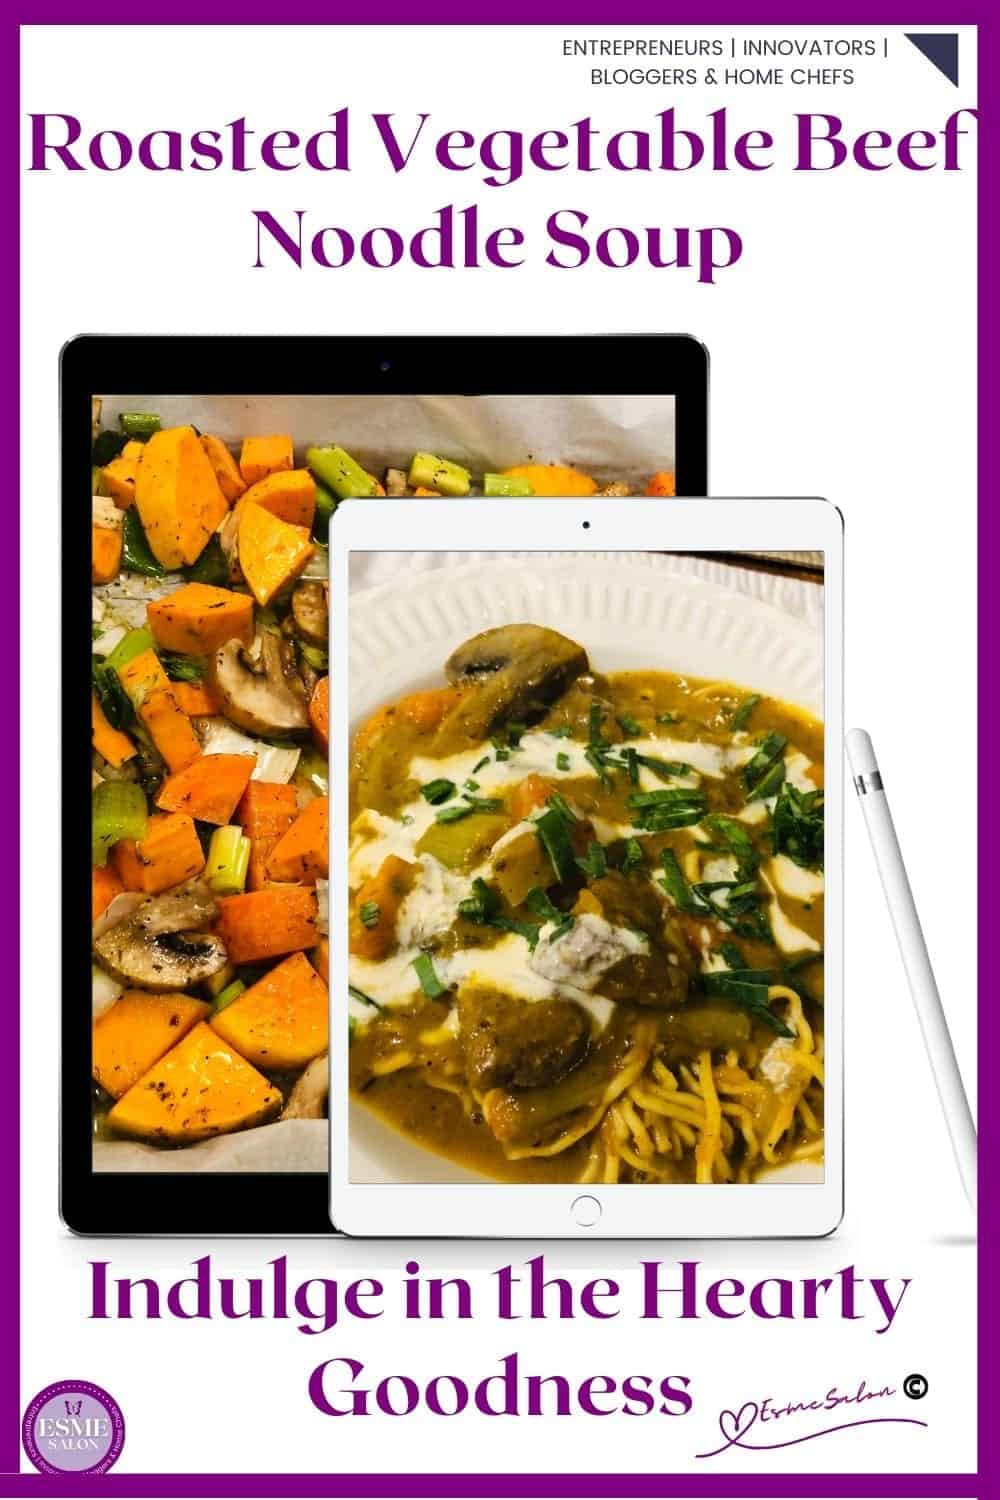 an image of a bowl of Roasted Vegetable Beef Noodle Soup decorated with cream and greens